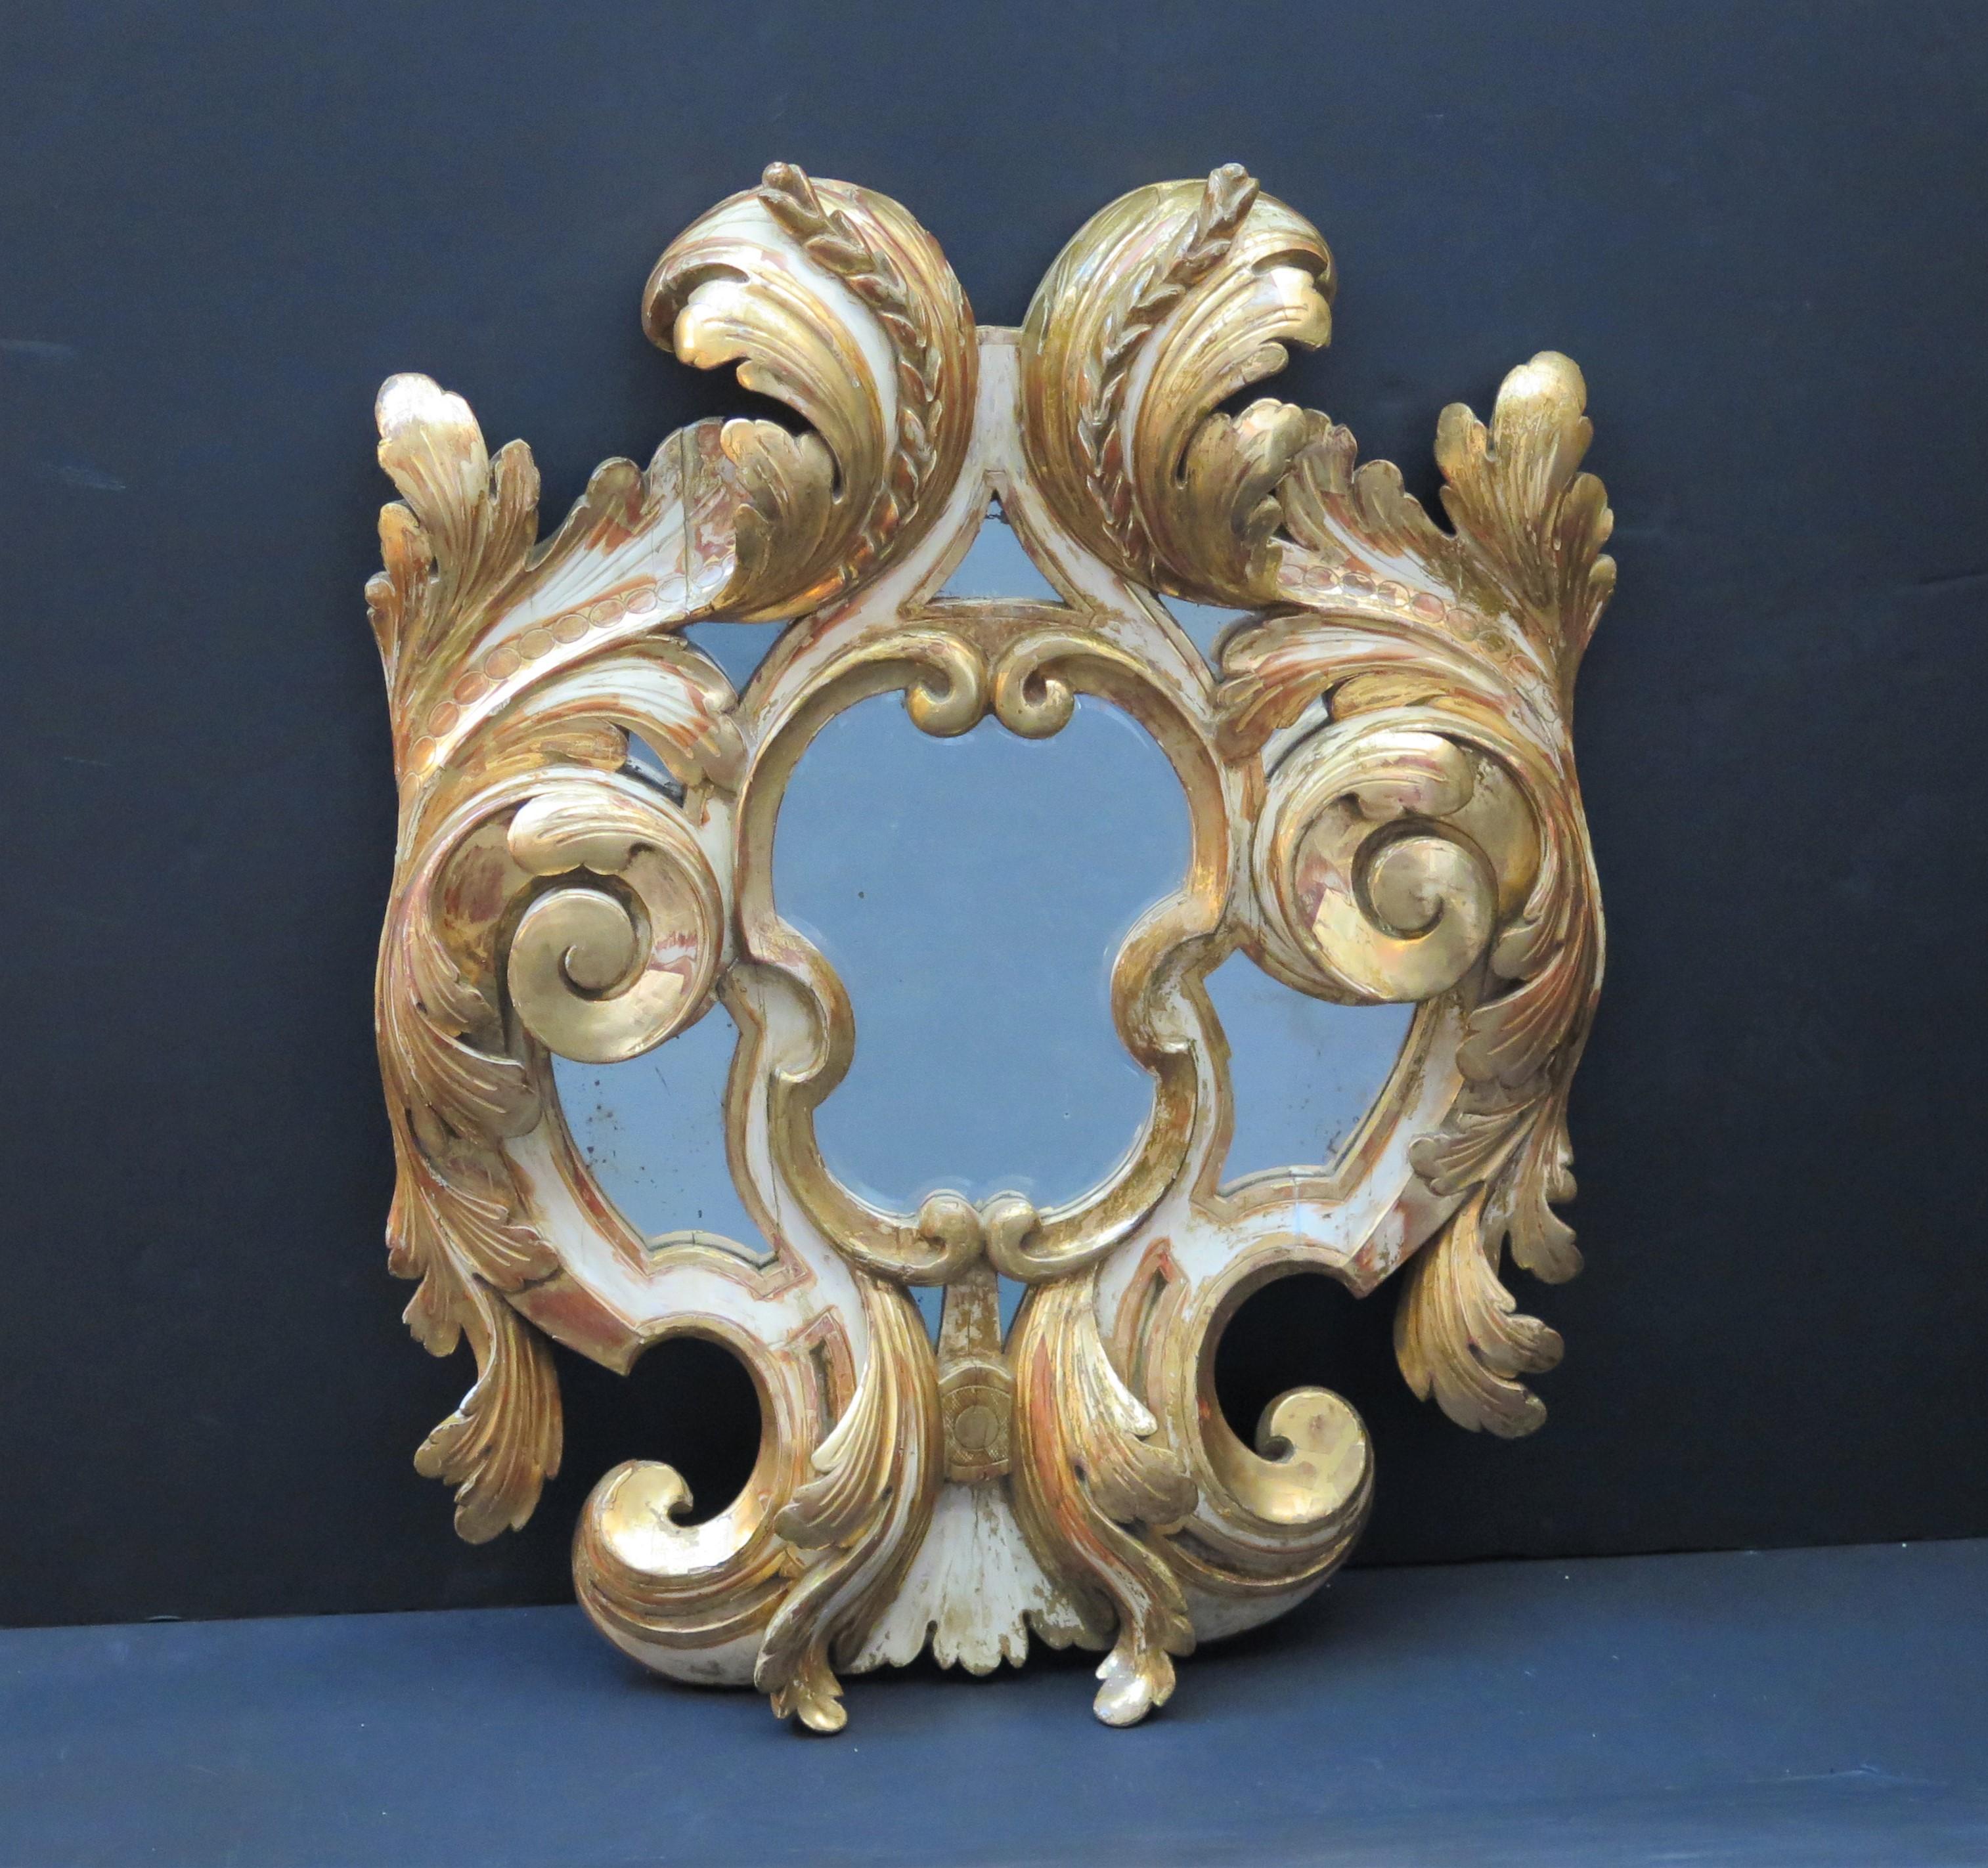 A 19th century Italian Baroque-style paint and parcel giltwood mirror, large scrolled foliates center the mirror plate, flanked on either side by small flat mirror plates